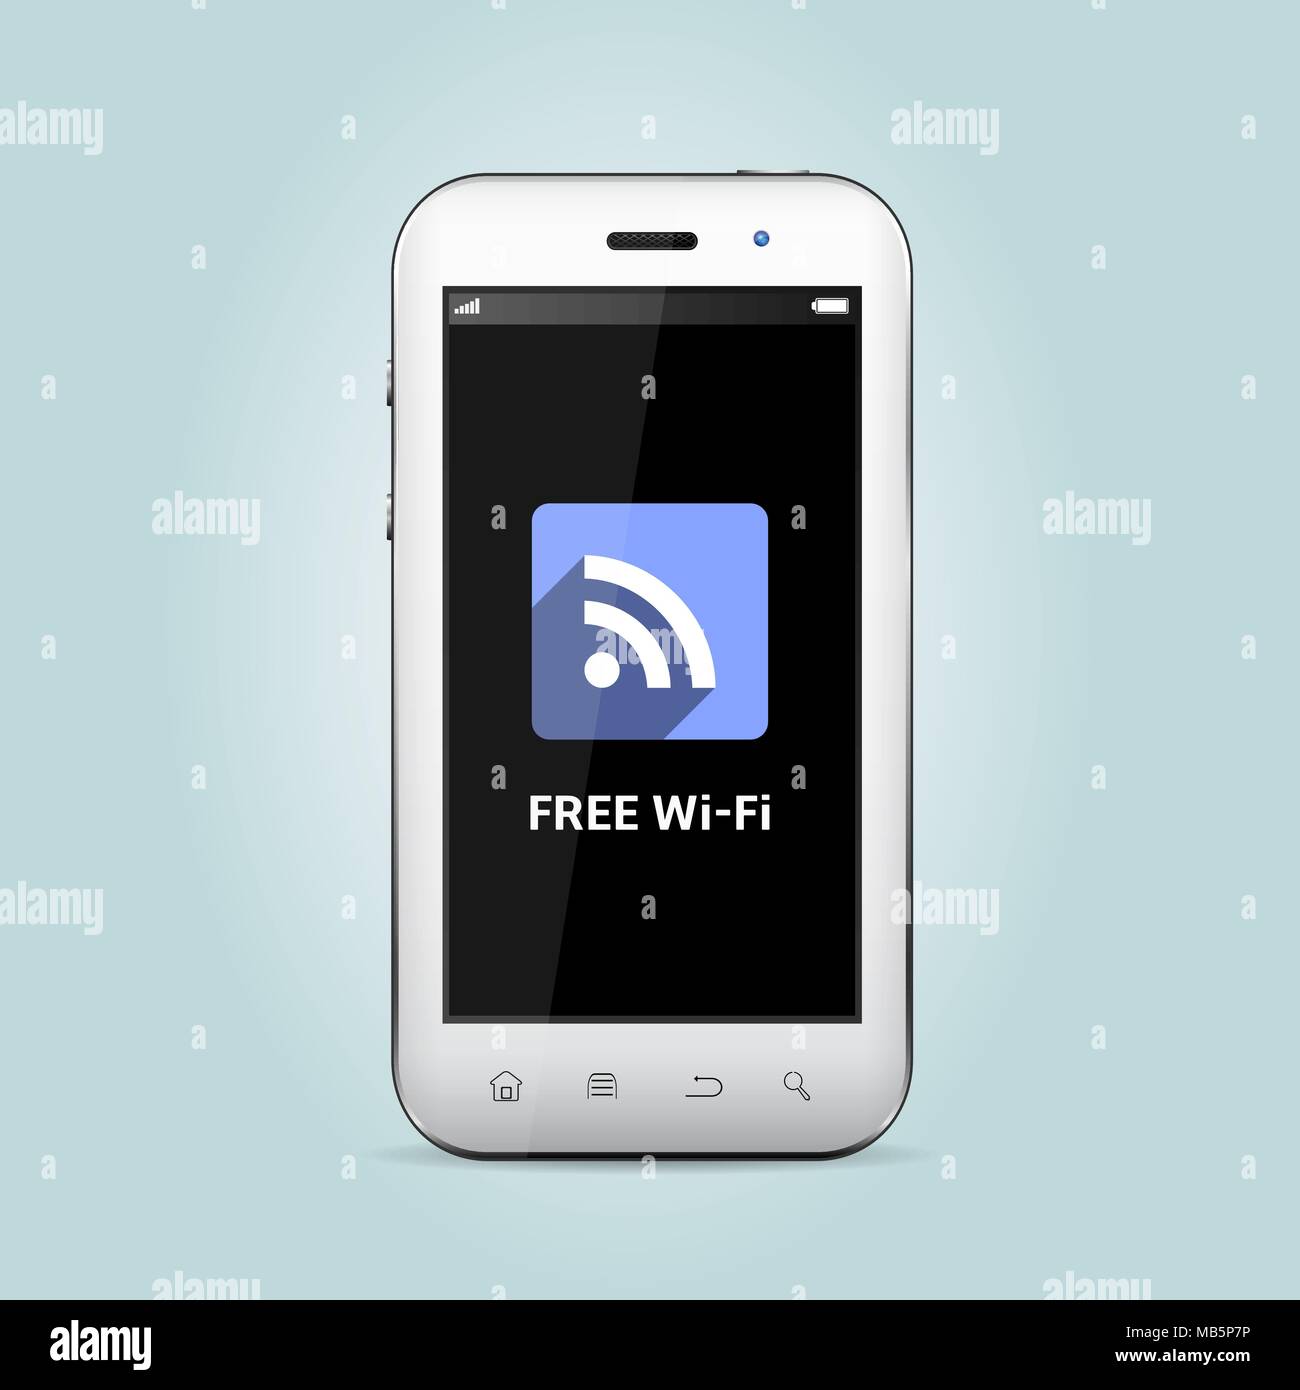 WiFi icon showing on smartphone Stock Vector